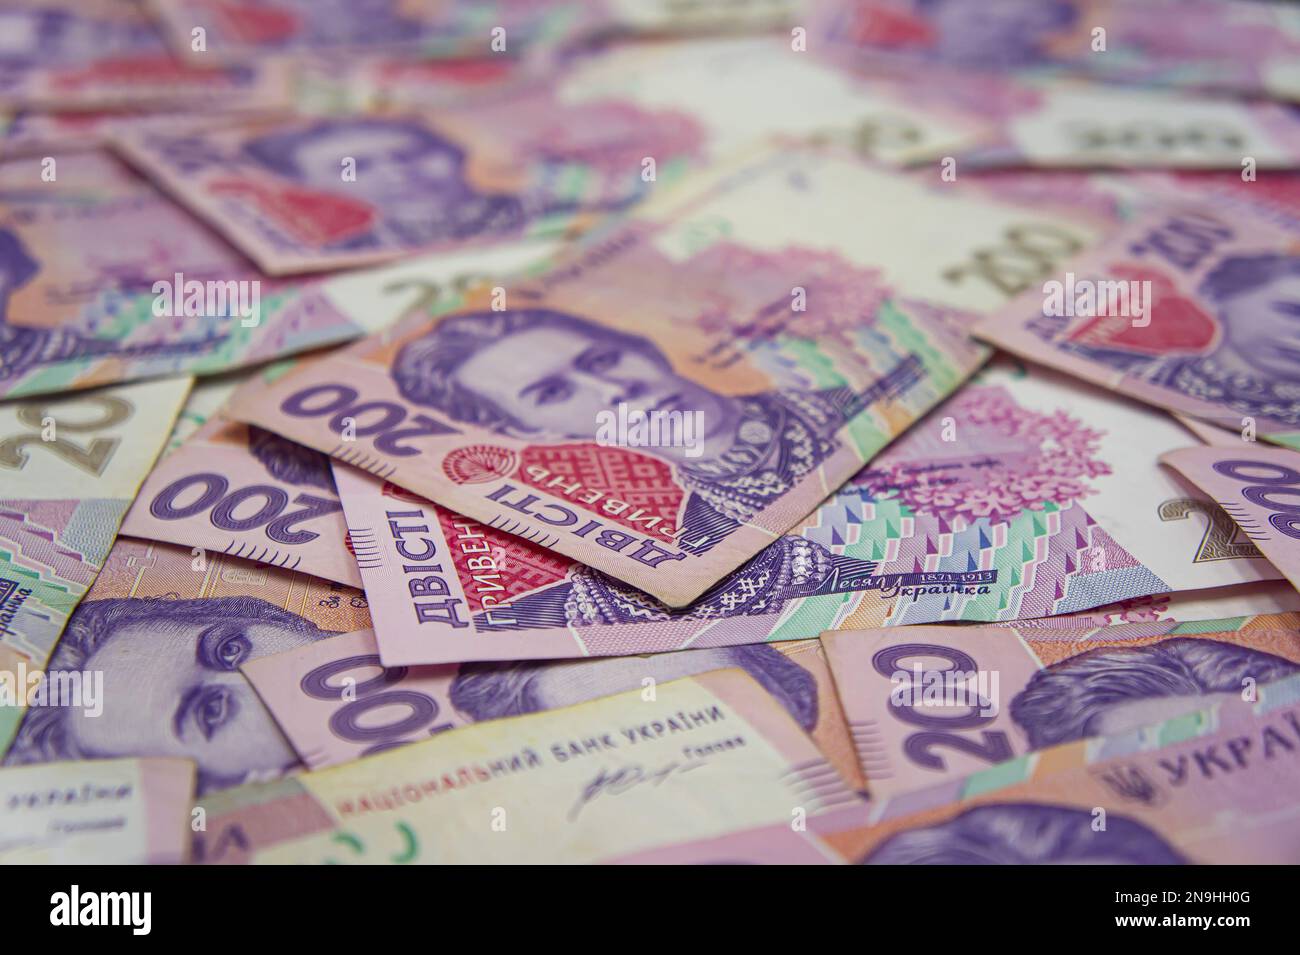 Ukrainian money background. banknotes with a face value of 200 hryvnia money background. Ukrainian money. Business concept. Background with hryvnia. P Stock Photo